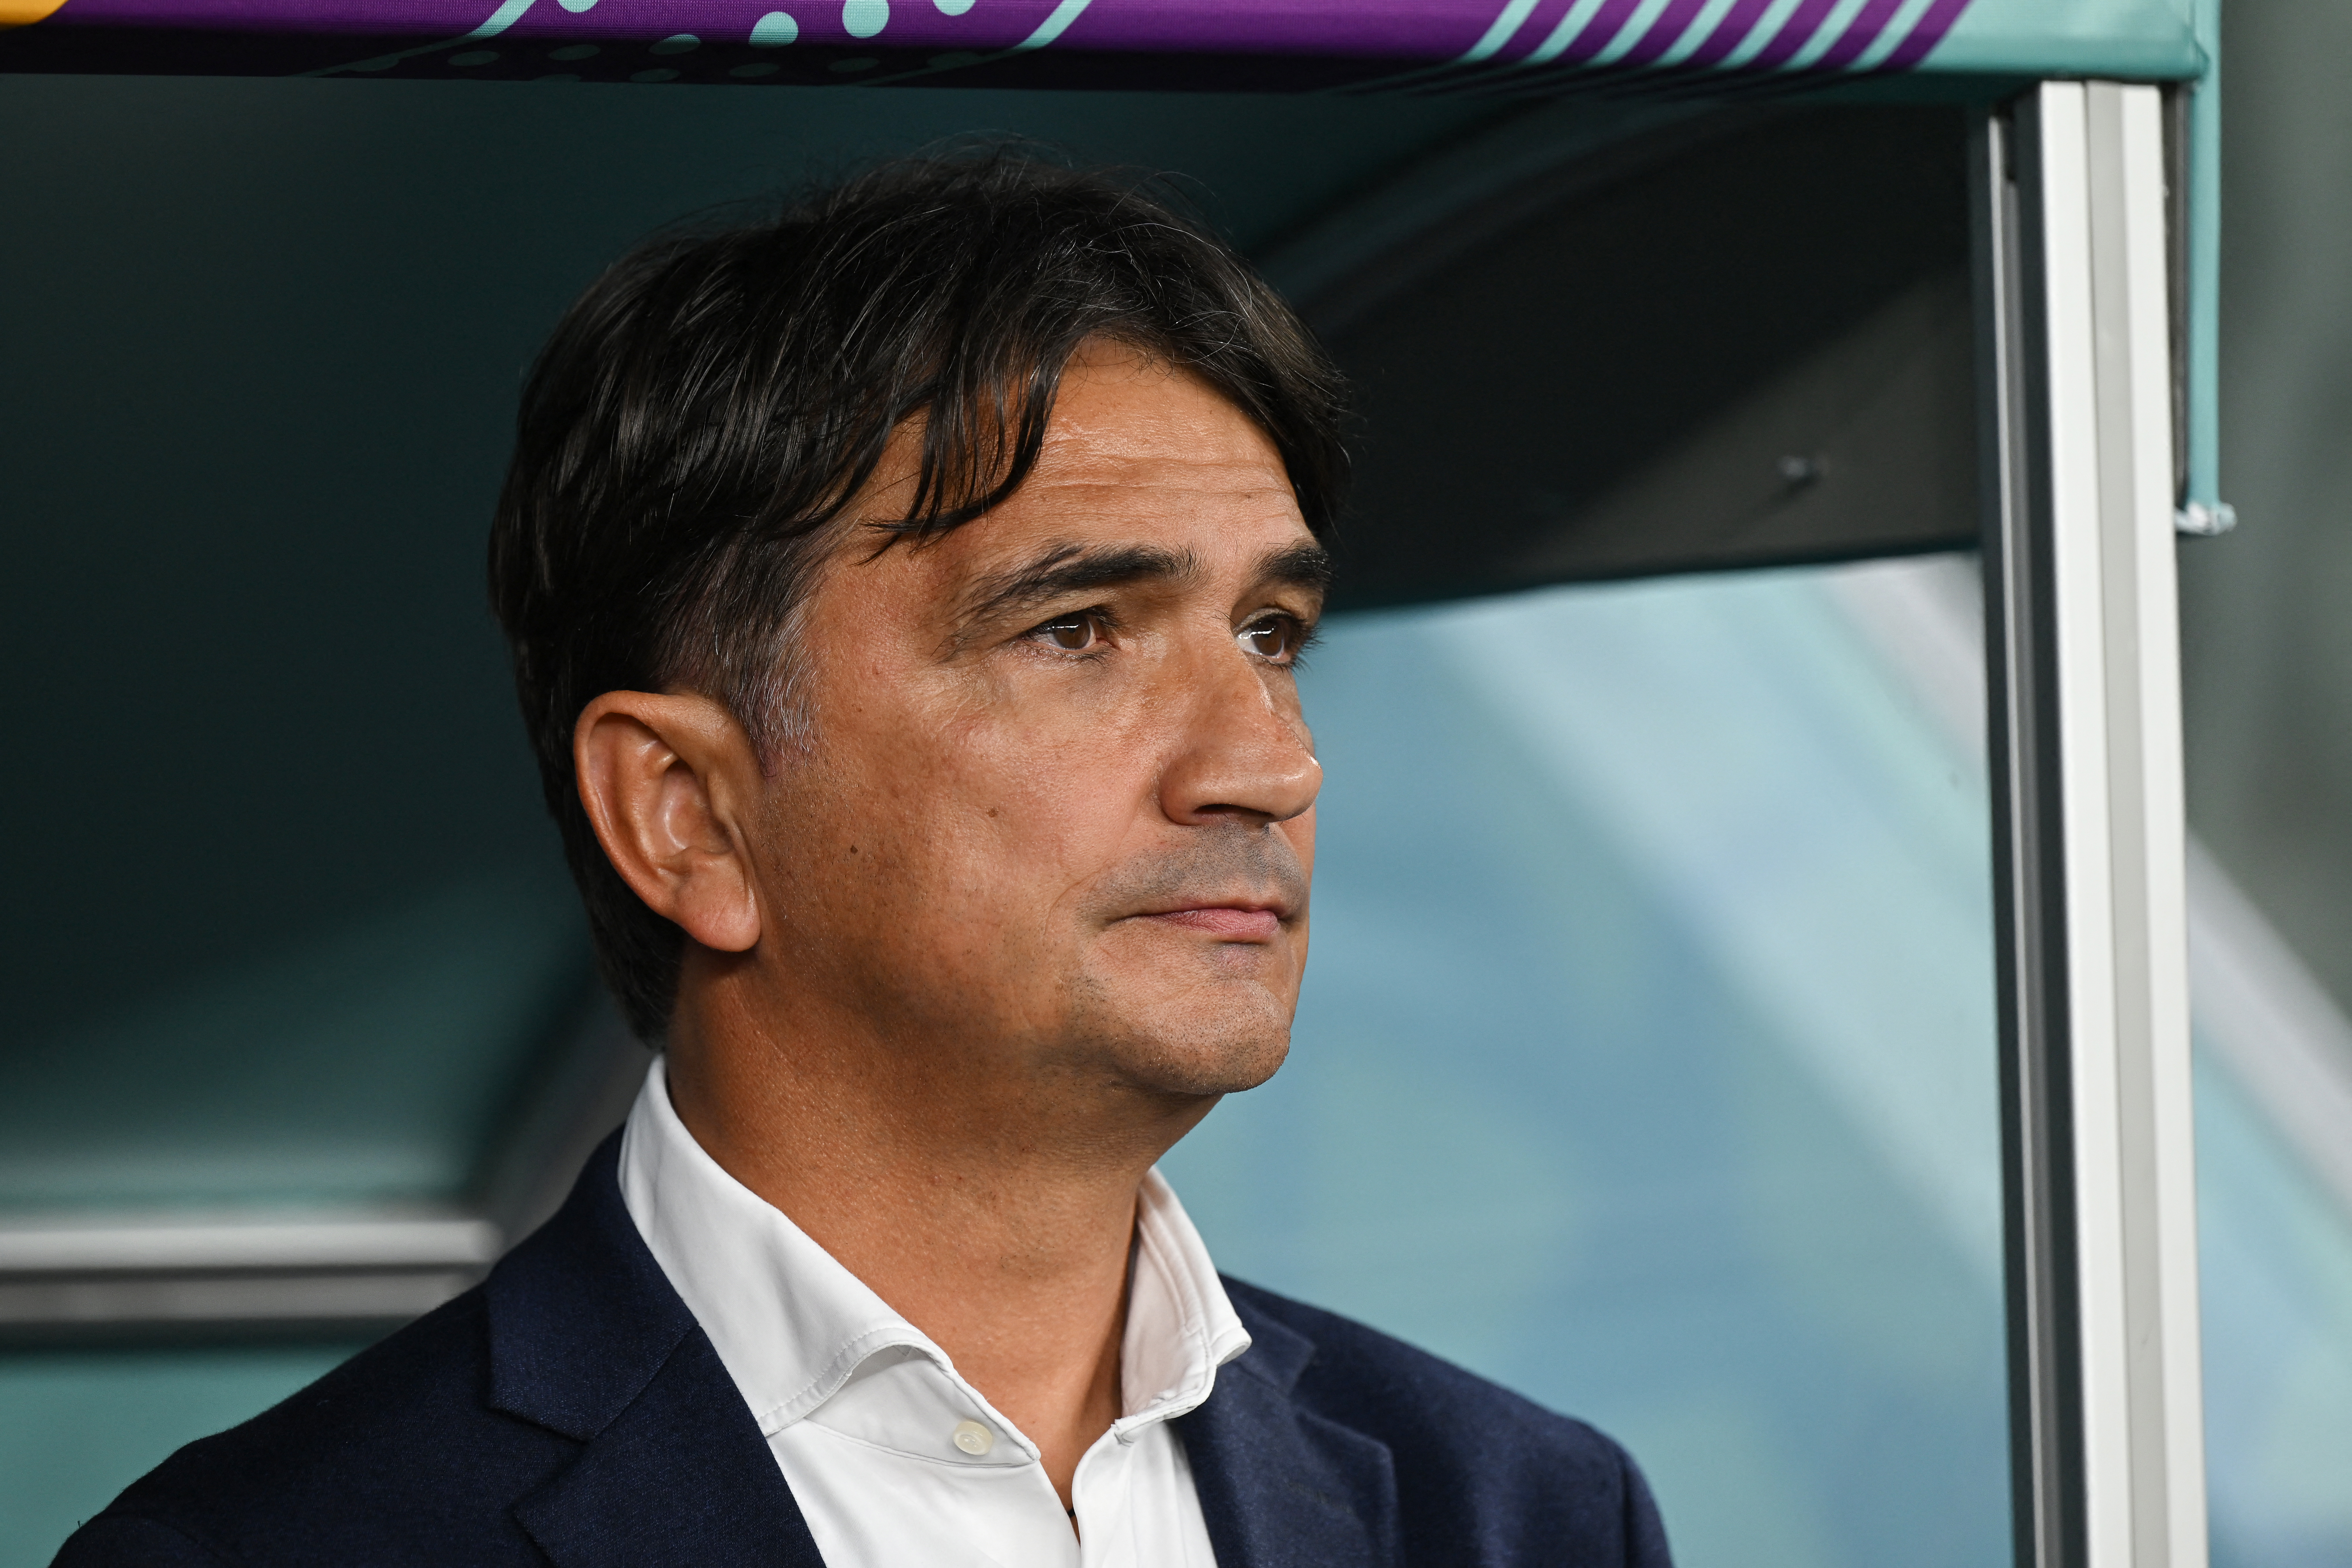 Zlatko Dalic has been the coach of Croatia since 2017 and comes from being a finalist in the last World Cup